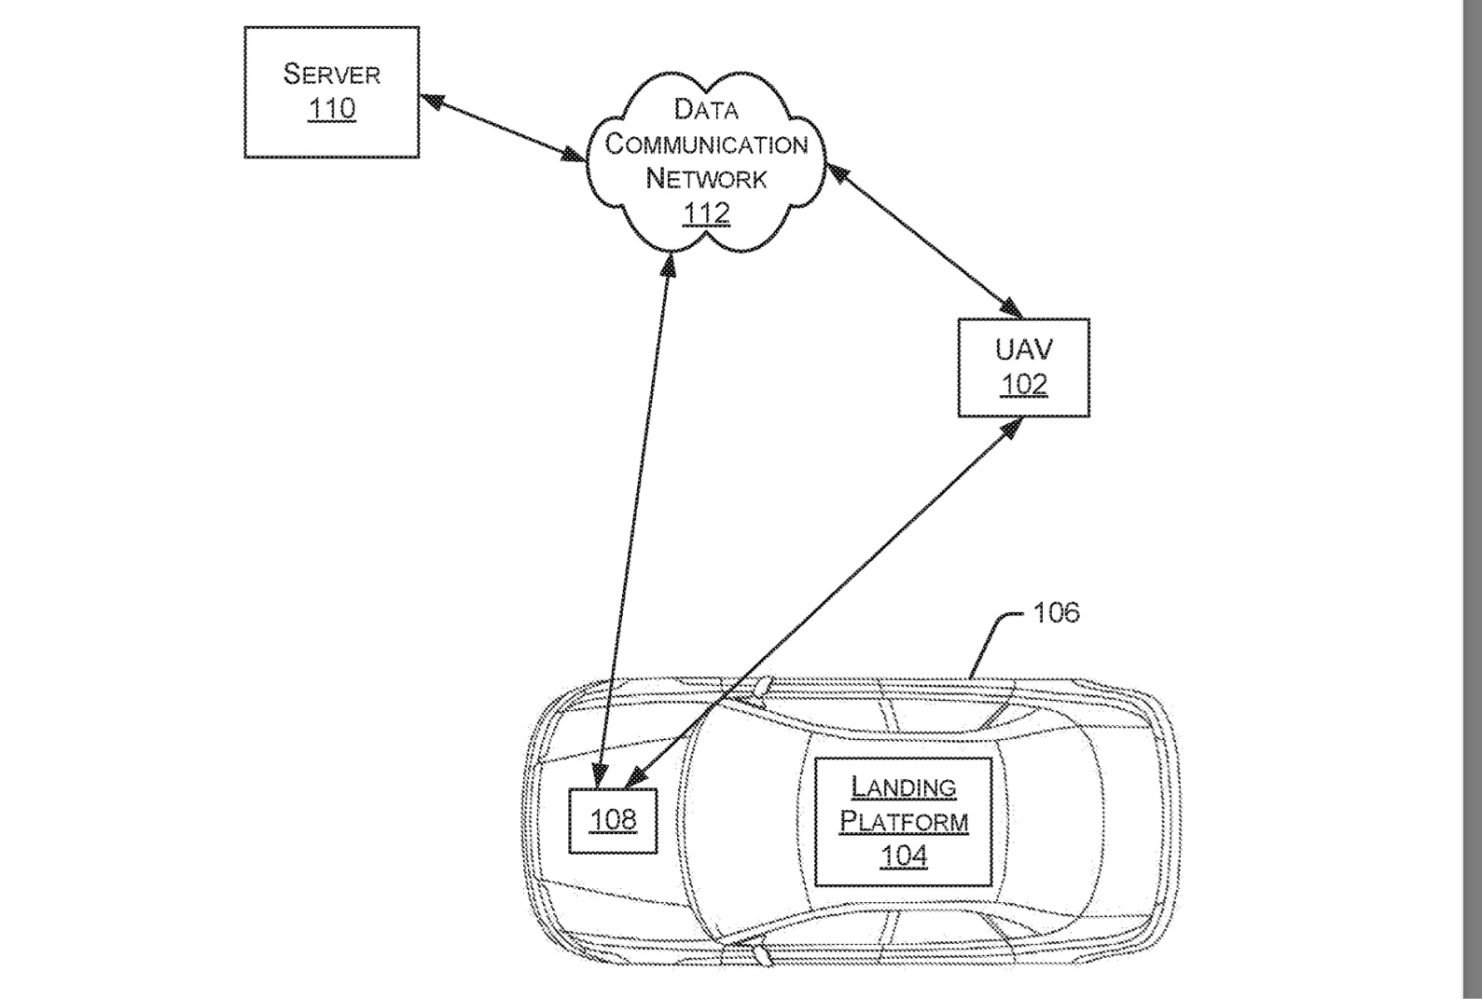 Ford patent details secure drone landing system for moving cars and trucks